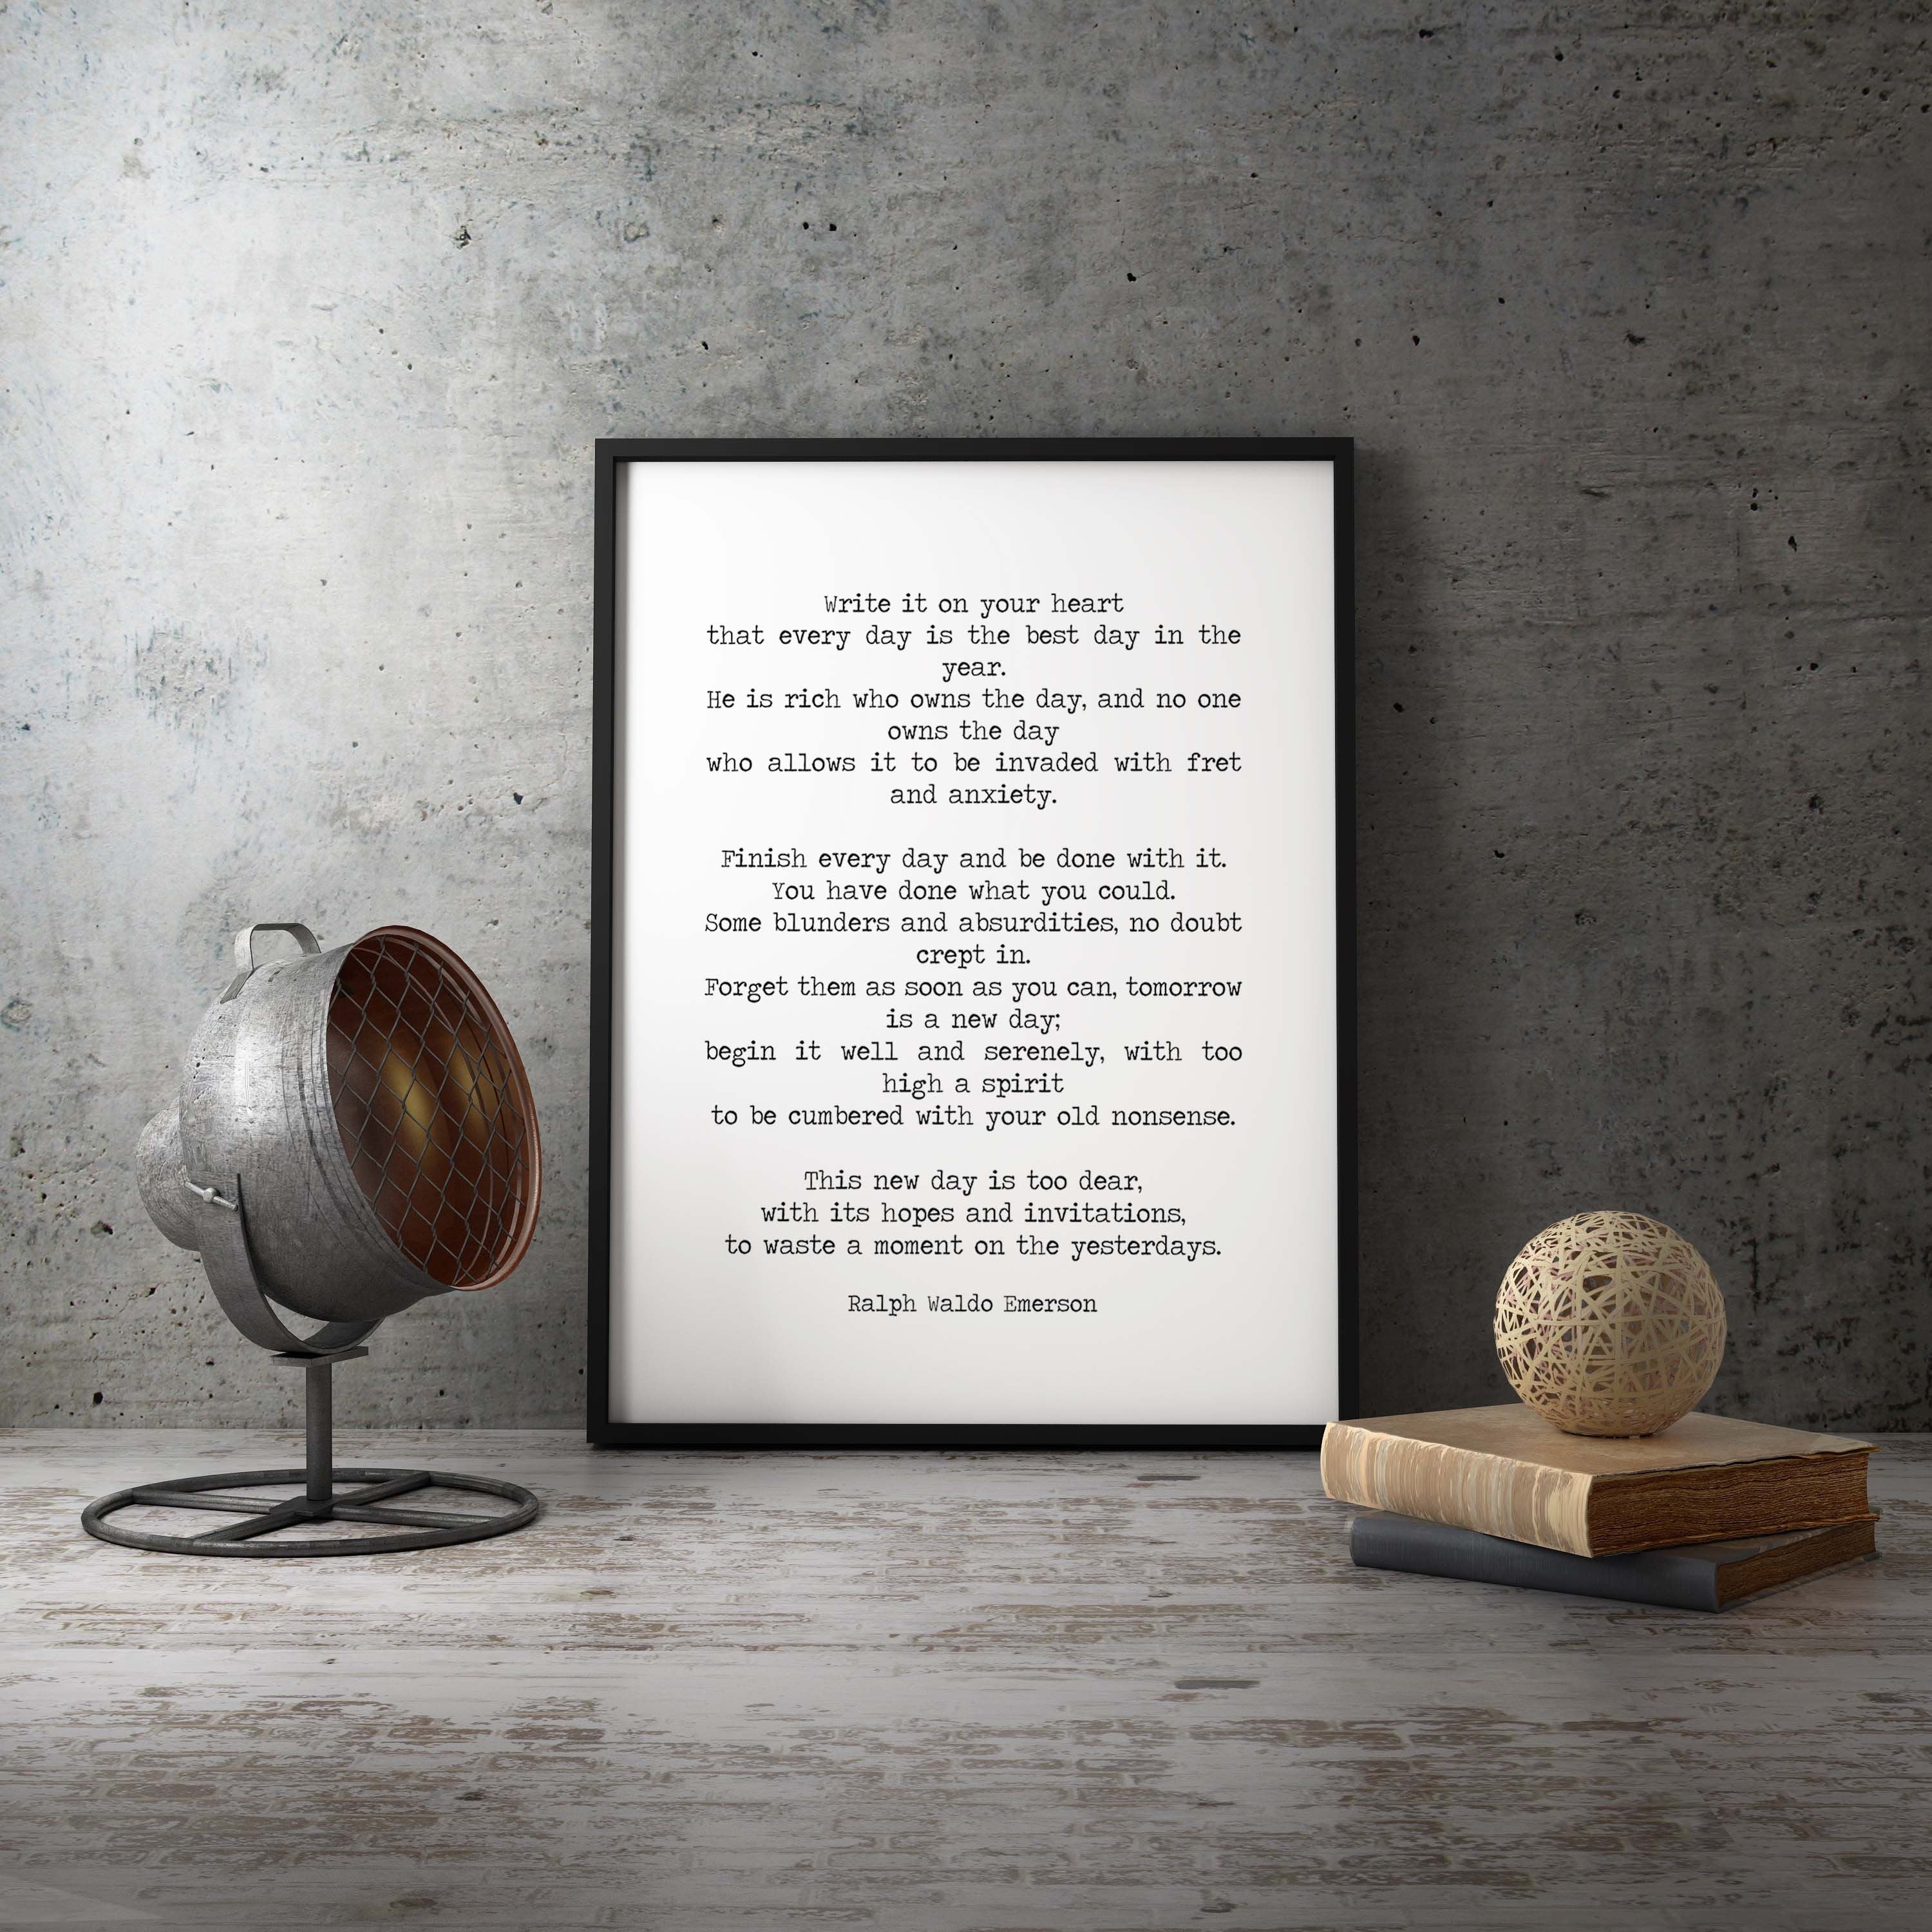 FRAMED Ralph Waldo Emerson Quote Print, He Is Rich Who Owns The Day Black & White Inspirational Print For Home Decor 8x10 - 24x36 framed